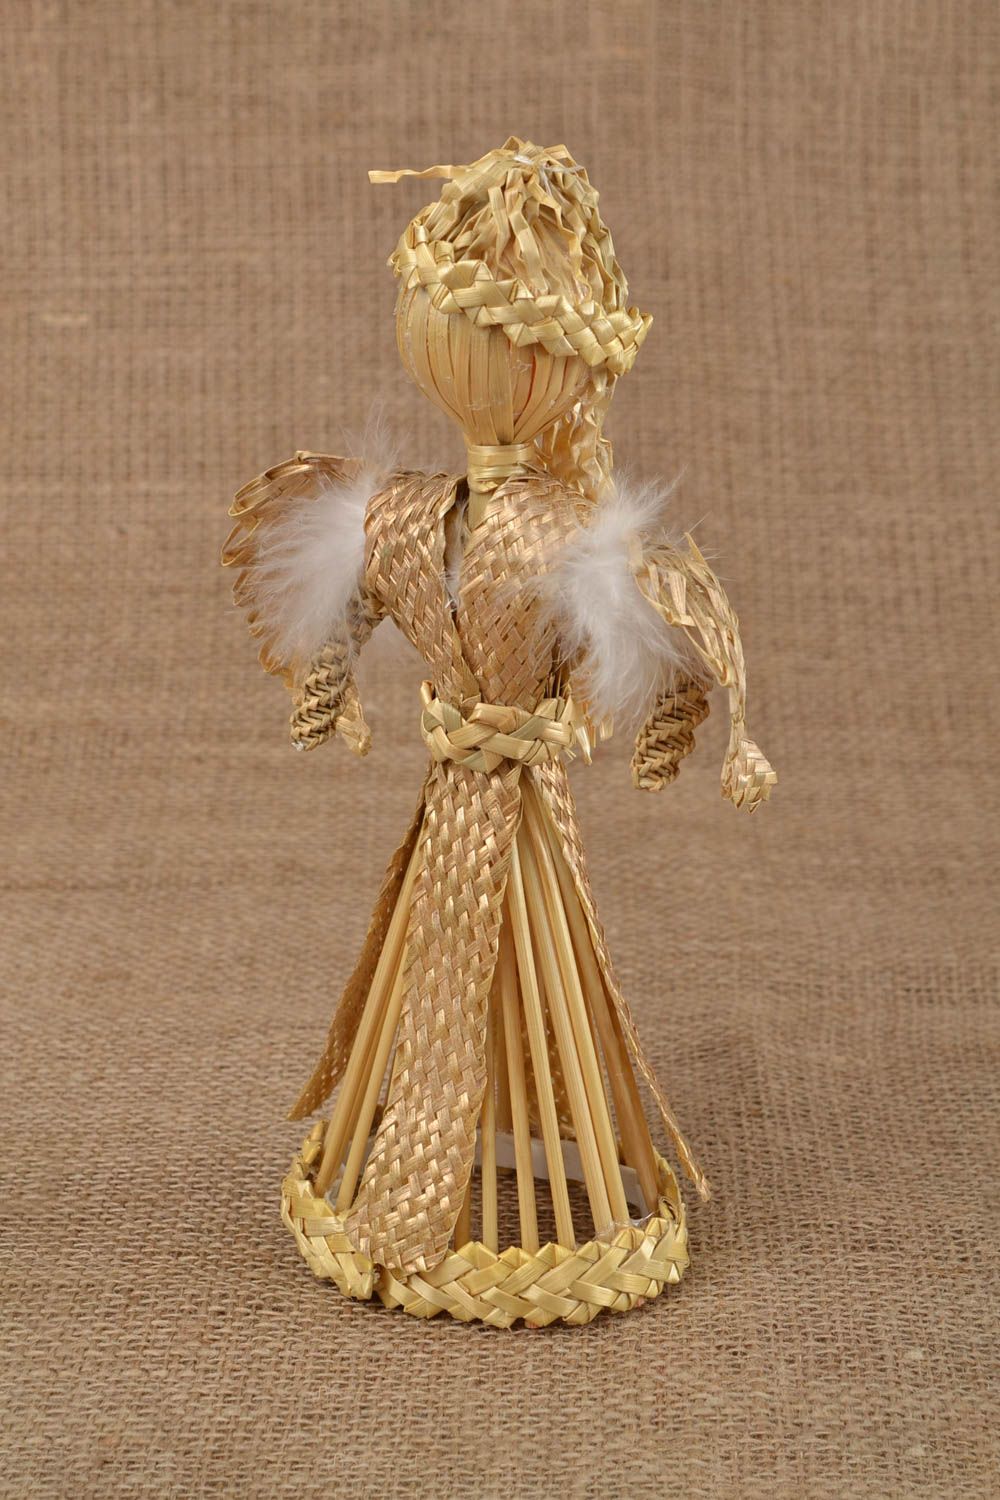 Handmade interior wall hanging woven of straw in the shape of guardian angel photo 1